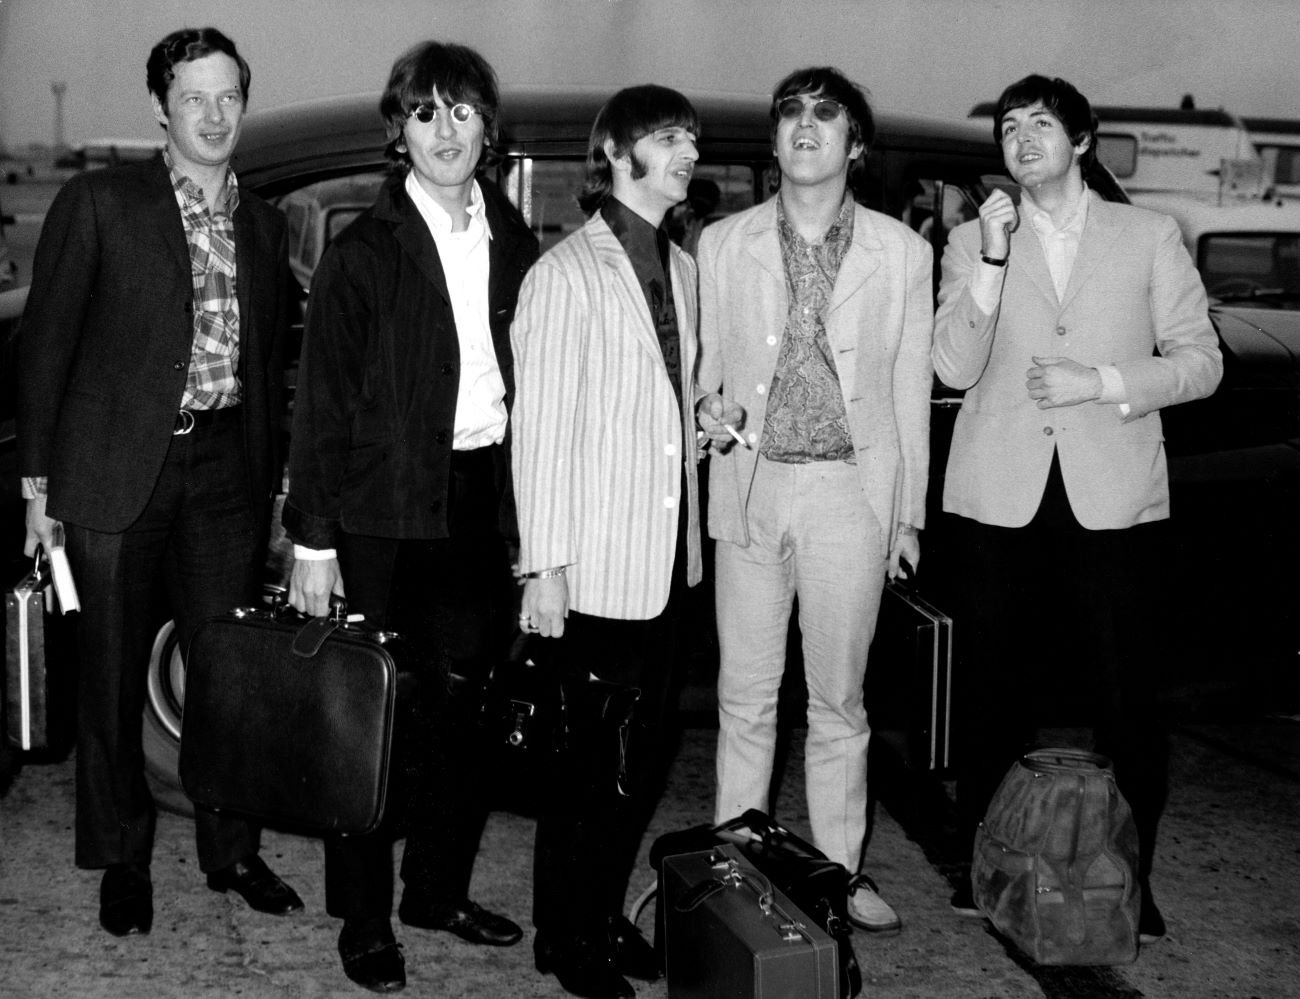 A black and white picture of The Beatles at an airport with manager Brian Epstein.